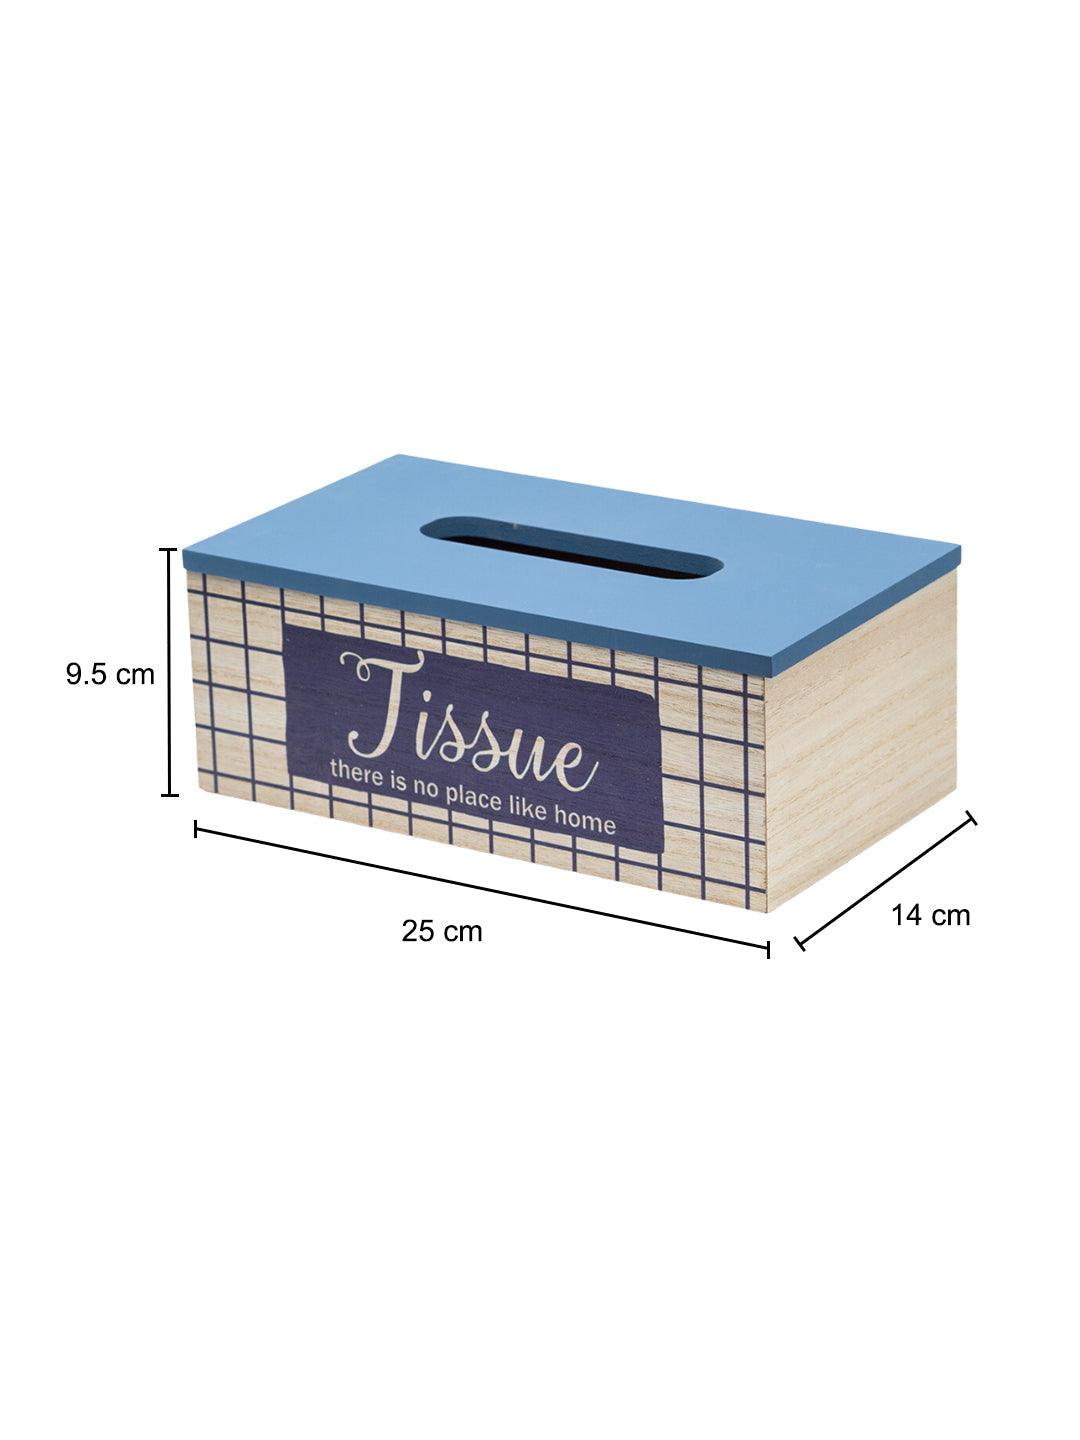 Exquisite Blue Tissue Holder Box For Home - 6